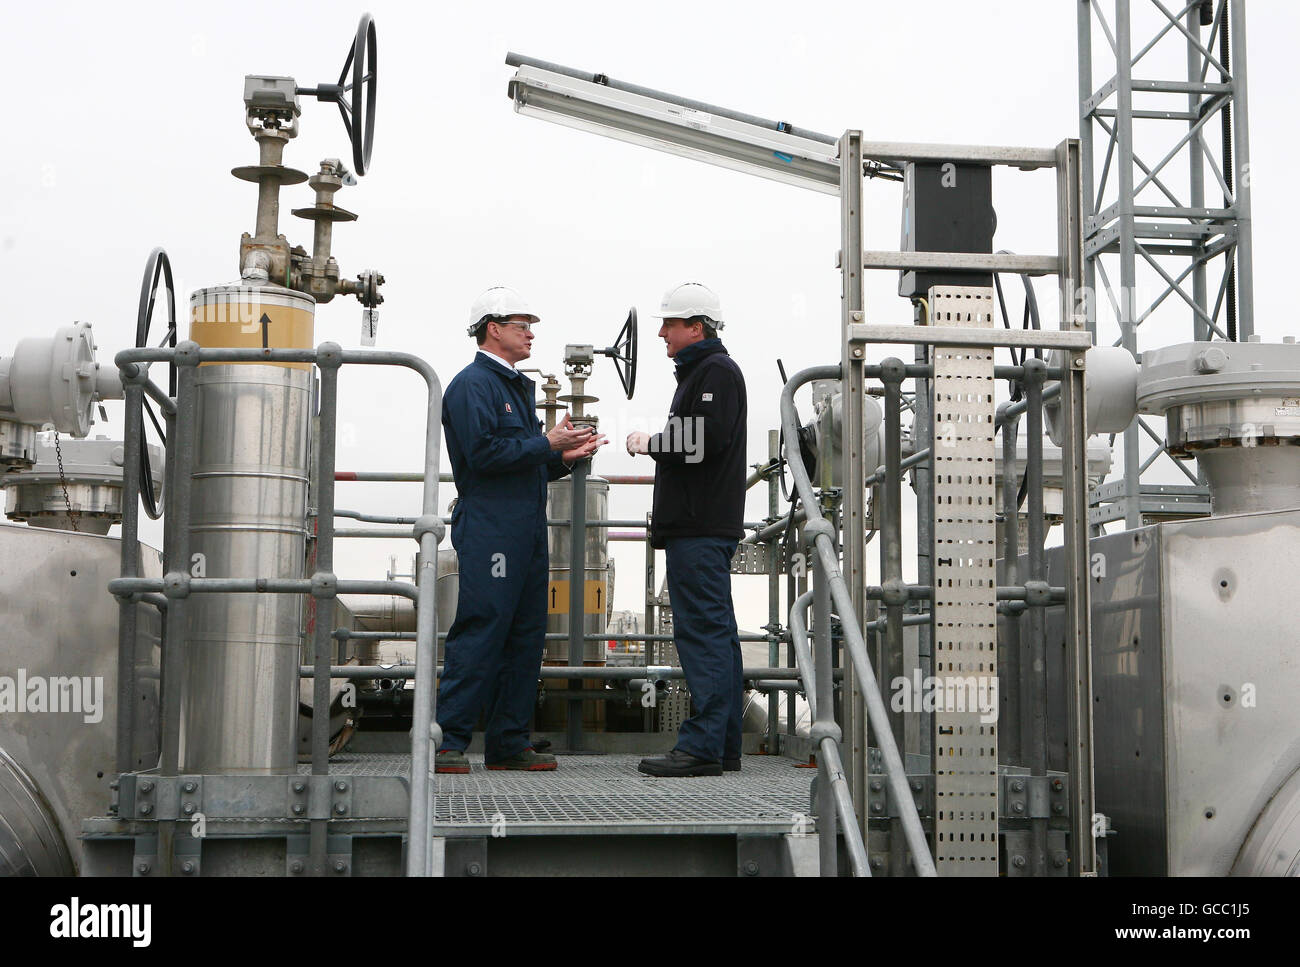 Conservative Party Leader David Cameron (right) is shown around the National Grid Grain LNG site in Grain, Kent, by Steve Holliday, C.E.O of National Grid as the Conservative Party launch their Energy Security Green Paper. Stock Photo